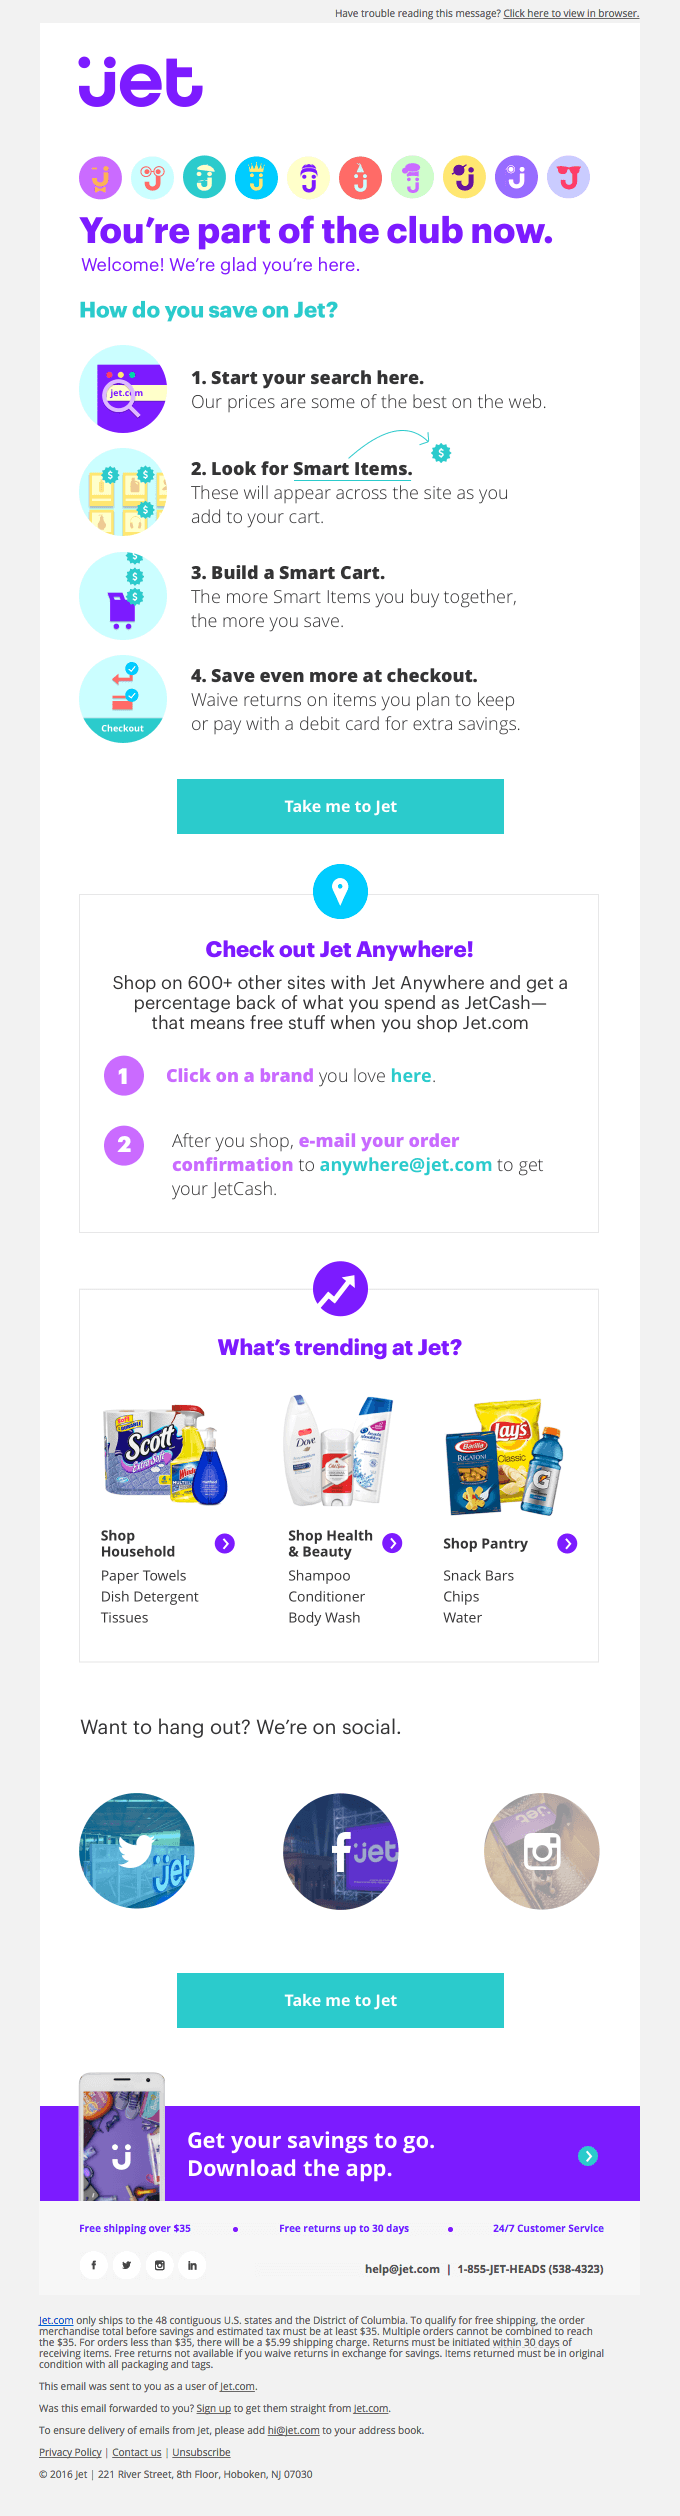 Triggered email example by Jet